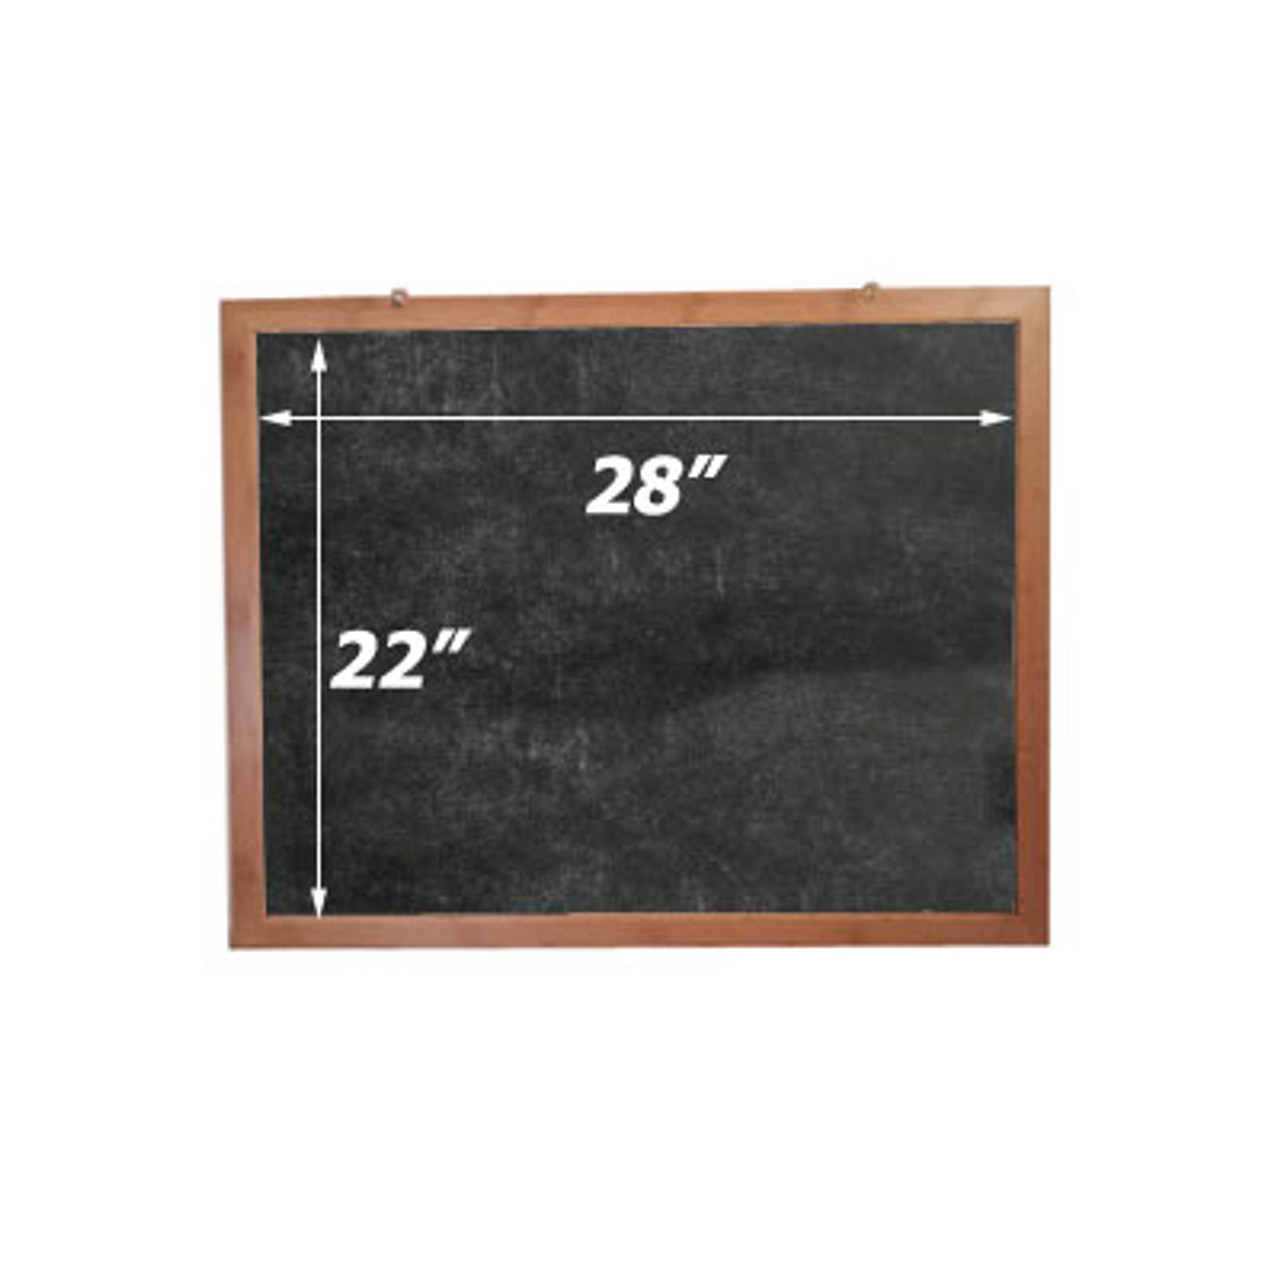 Hanging Bamboo Sign Holder - Includes Chalkboard Insert - 22